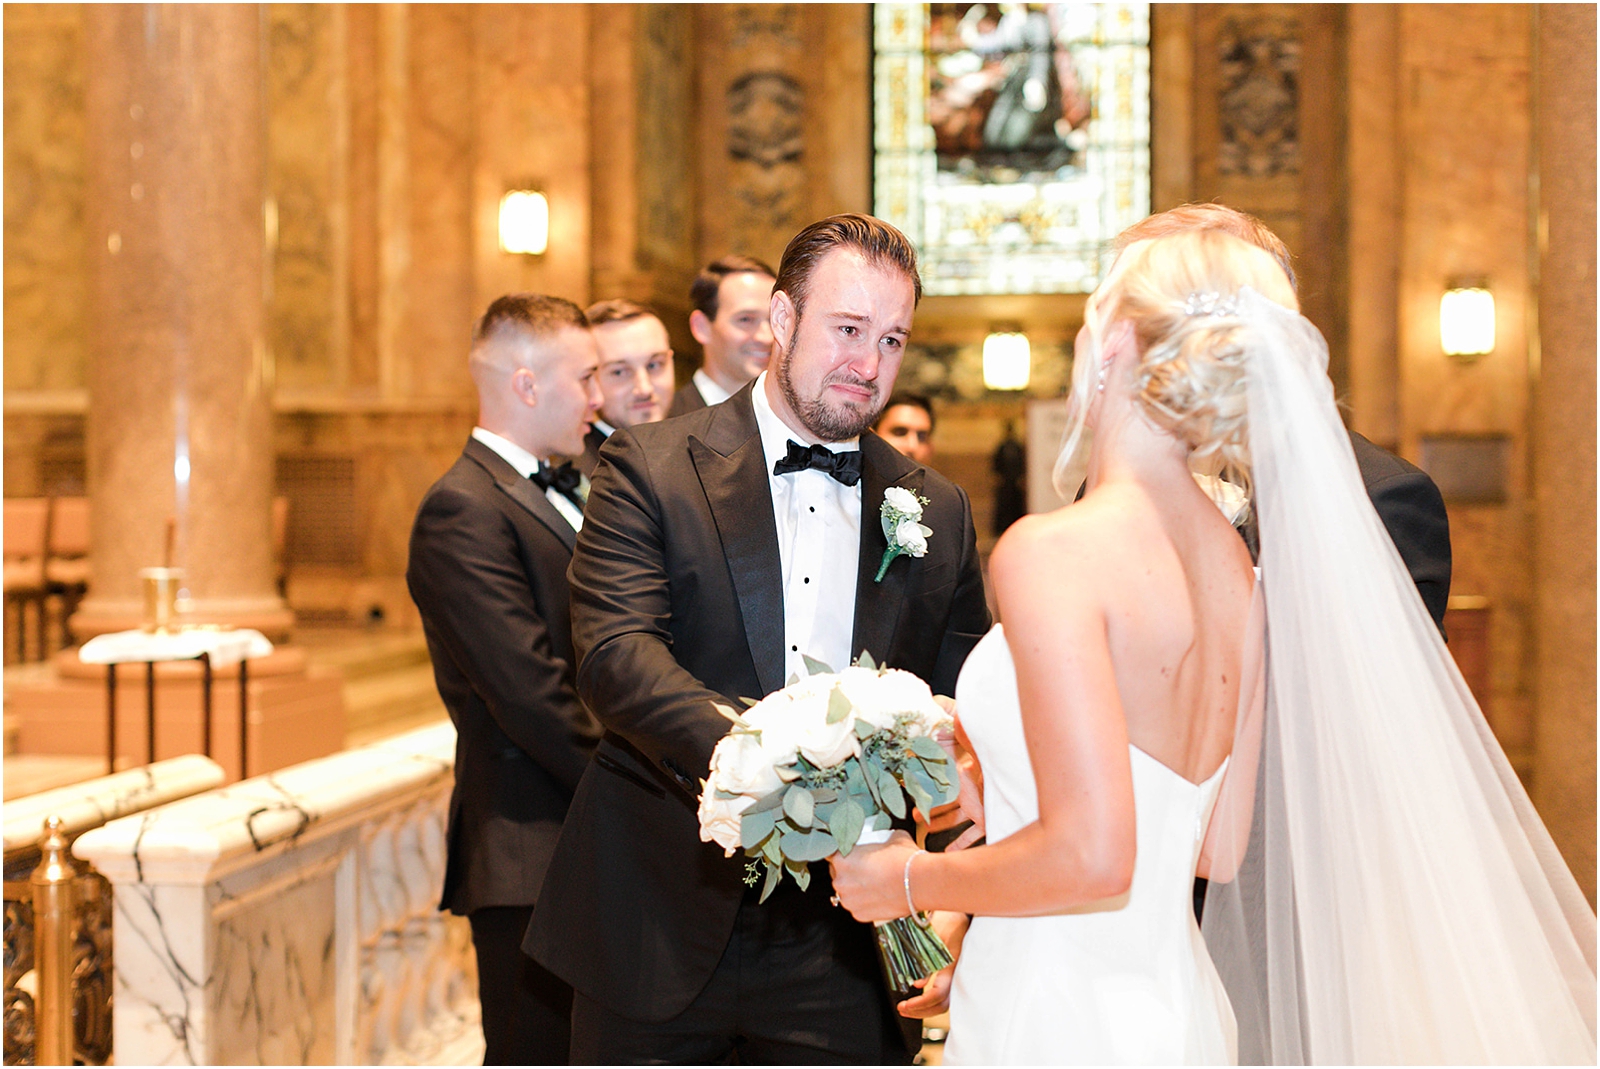 emotional groom seeing bride come down the aisle